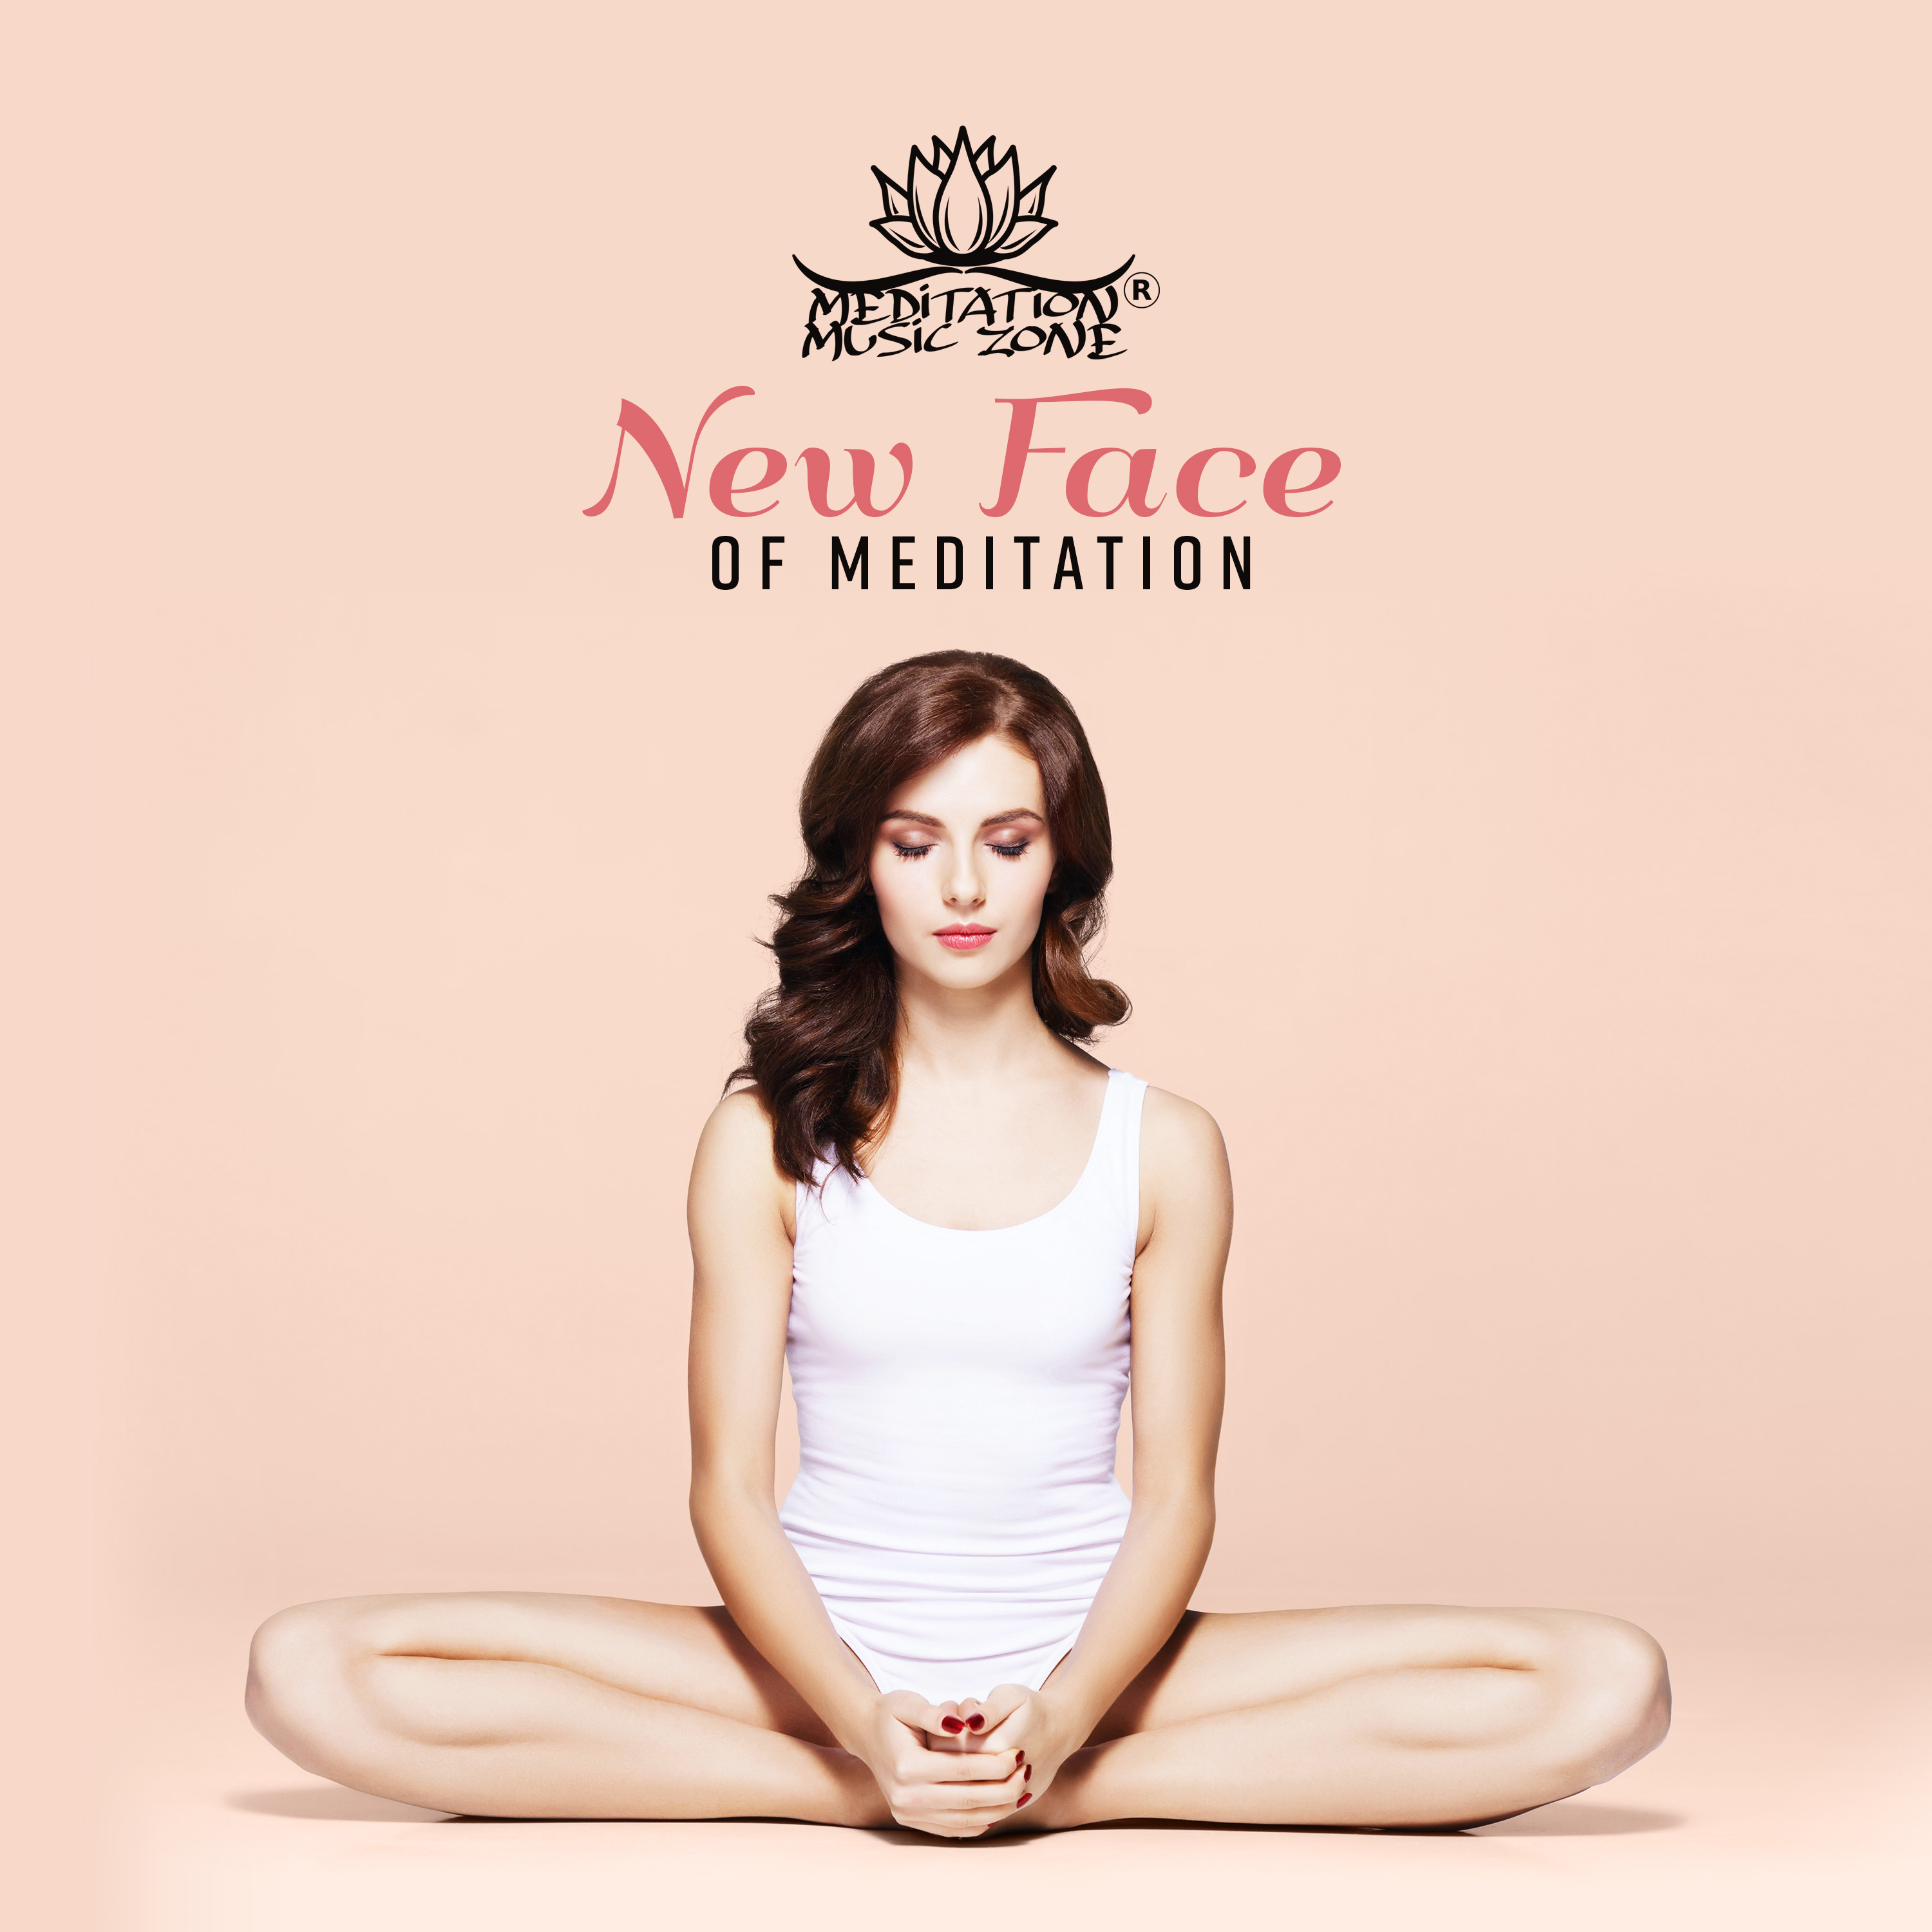 New Face of Meditation - Clean the Mind, Body Mute, Focus on the Position, Maintain Balance, Align Breath, Relaxation & Meditation